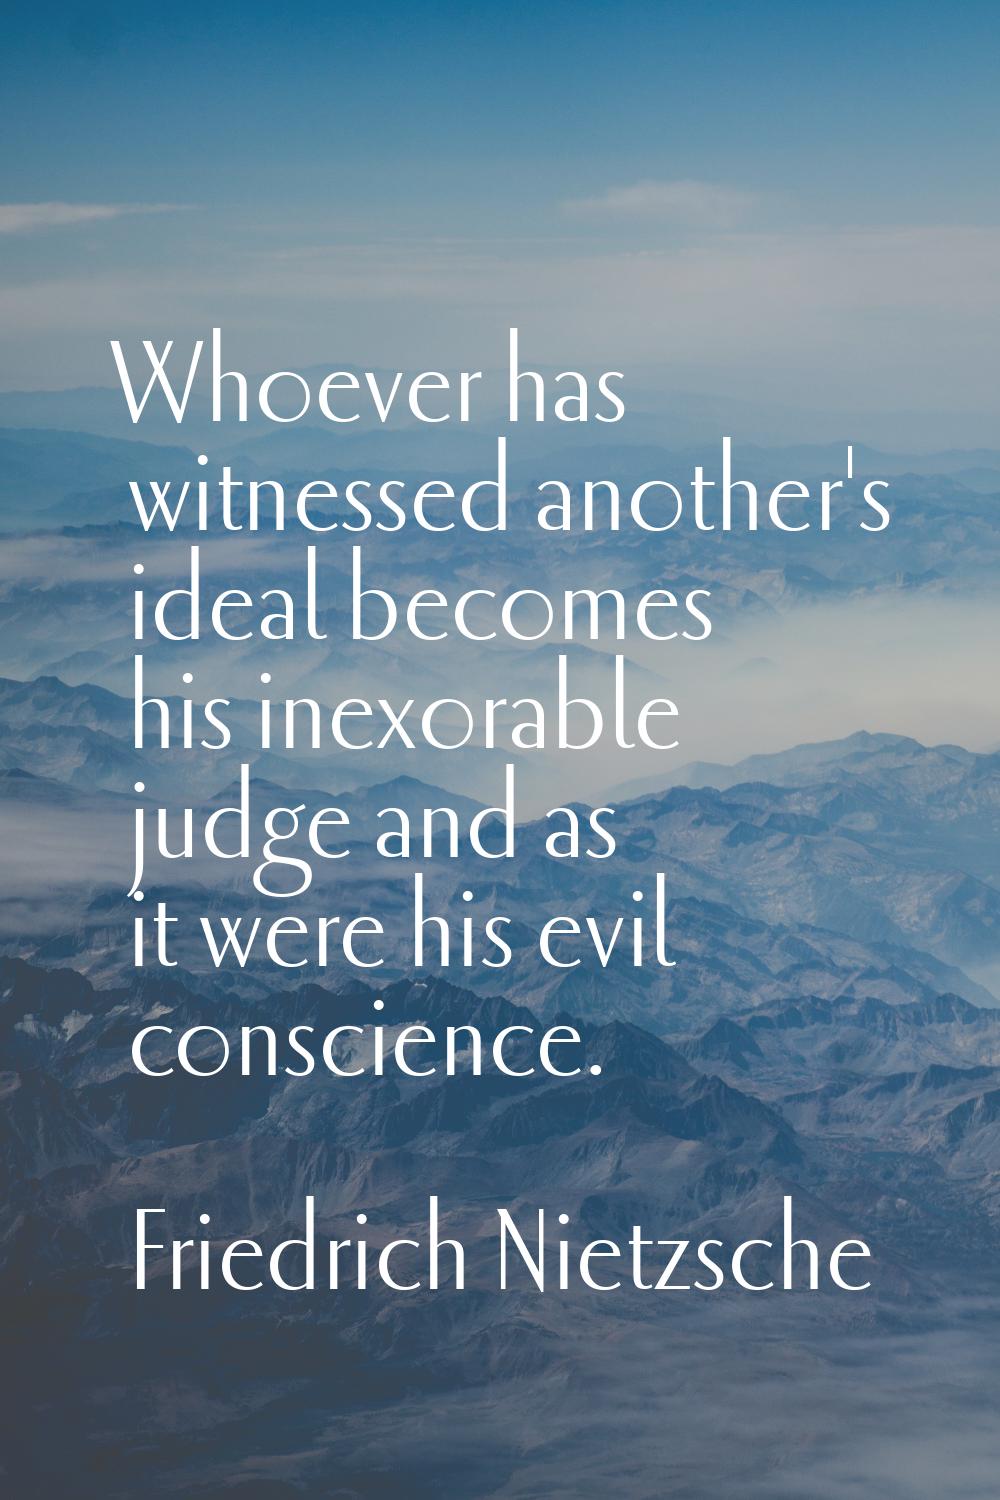 Whoever has witnessed another's ideal becomes his inexorable judge and as it were his evil conscien